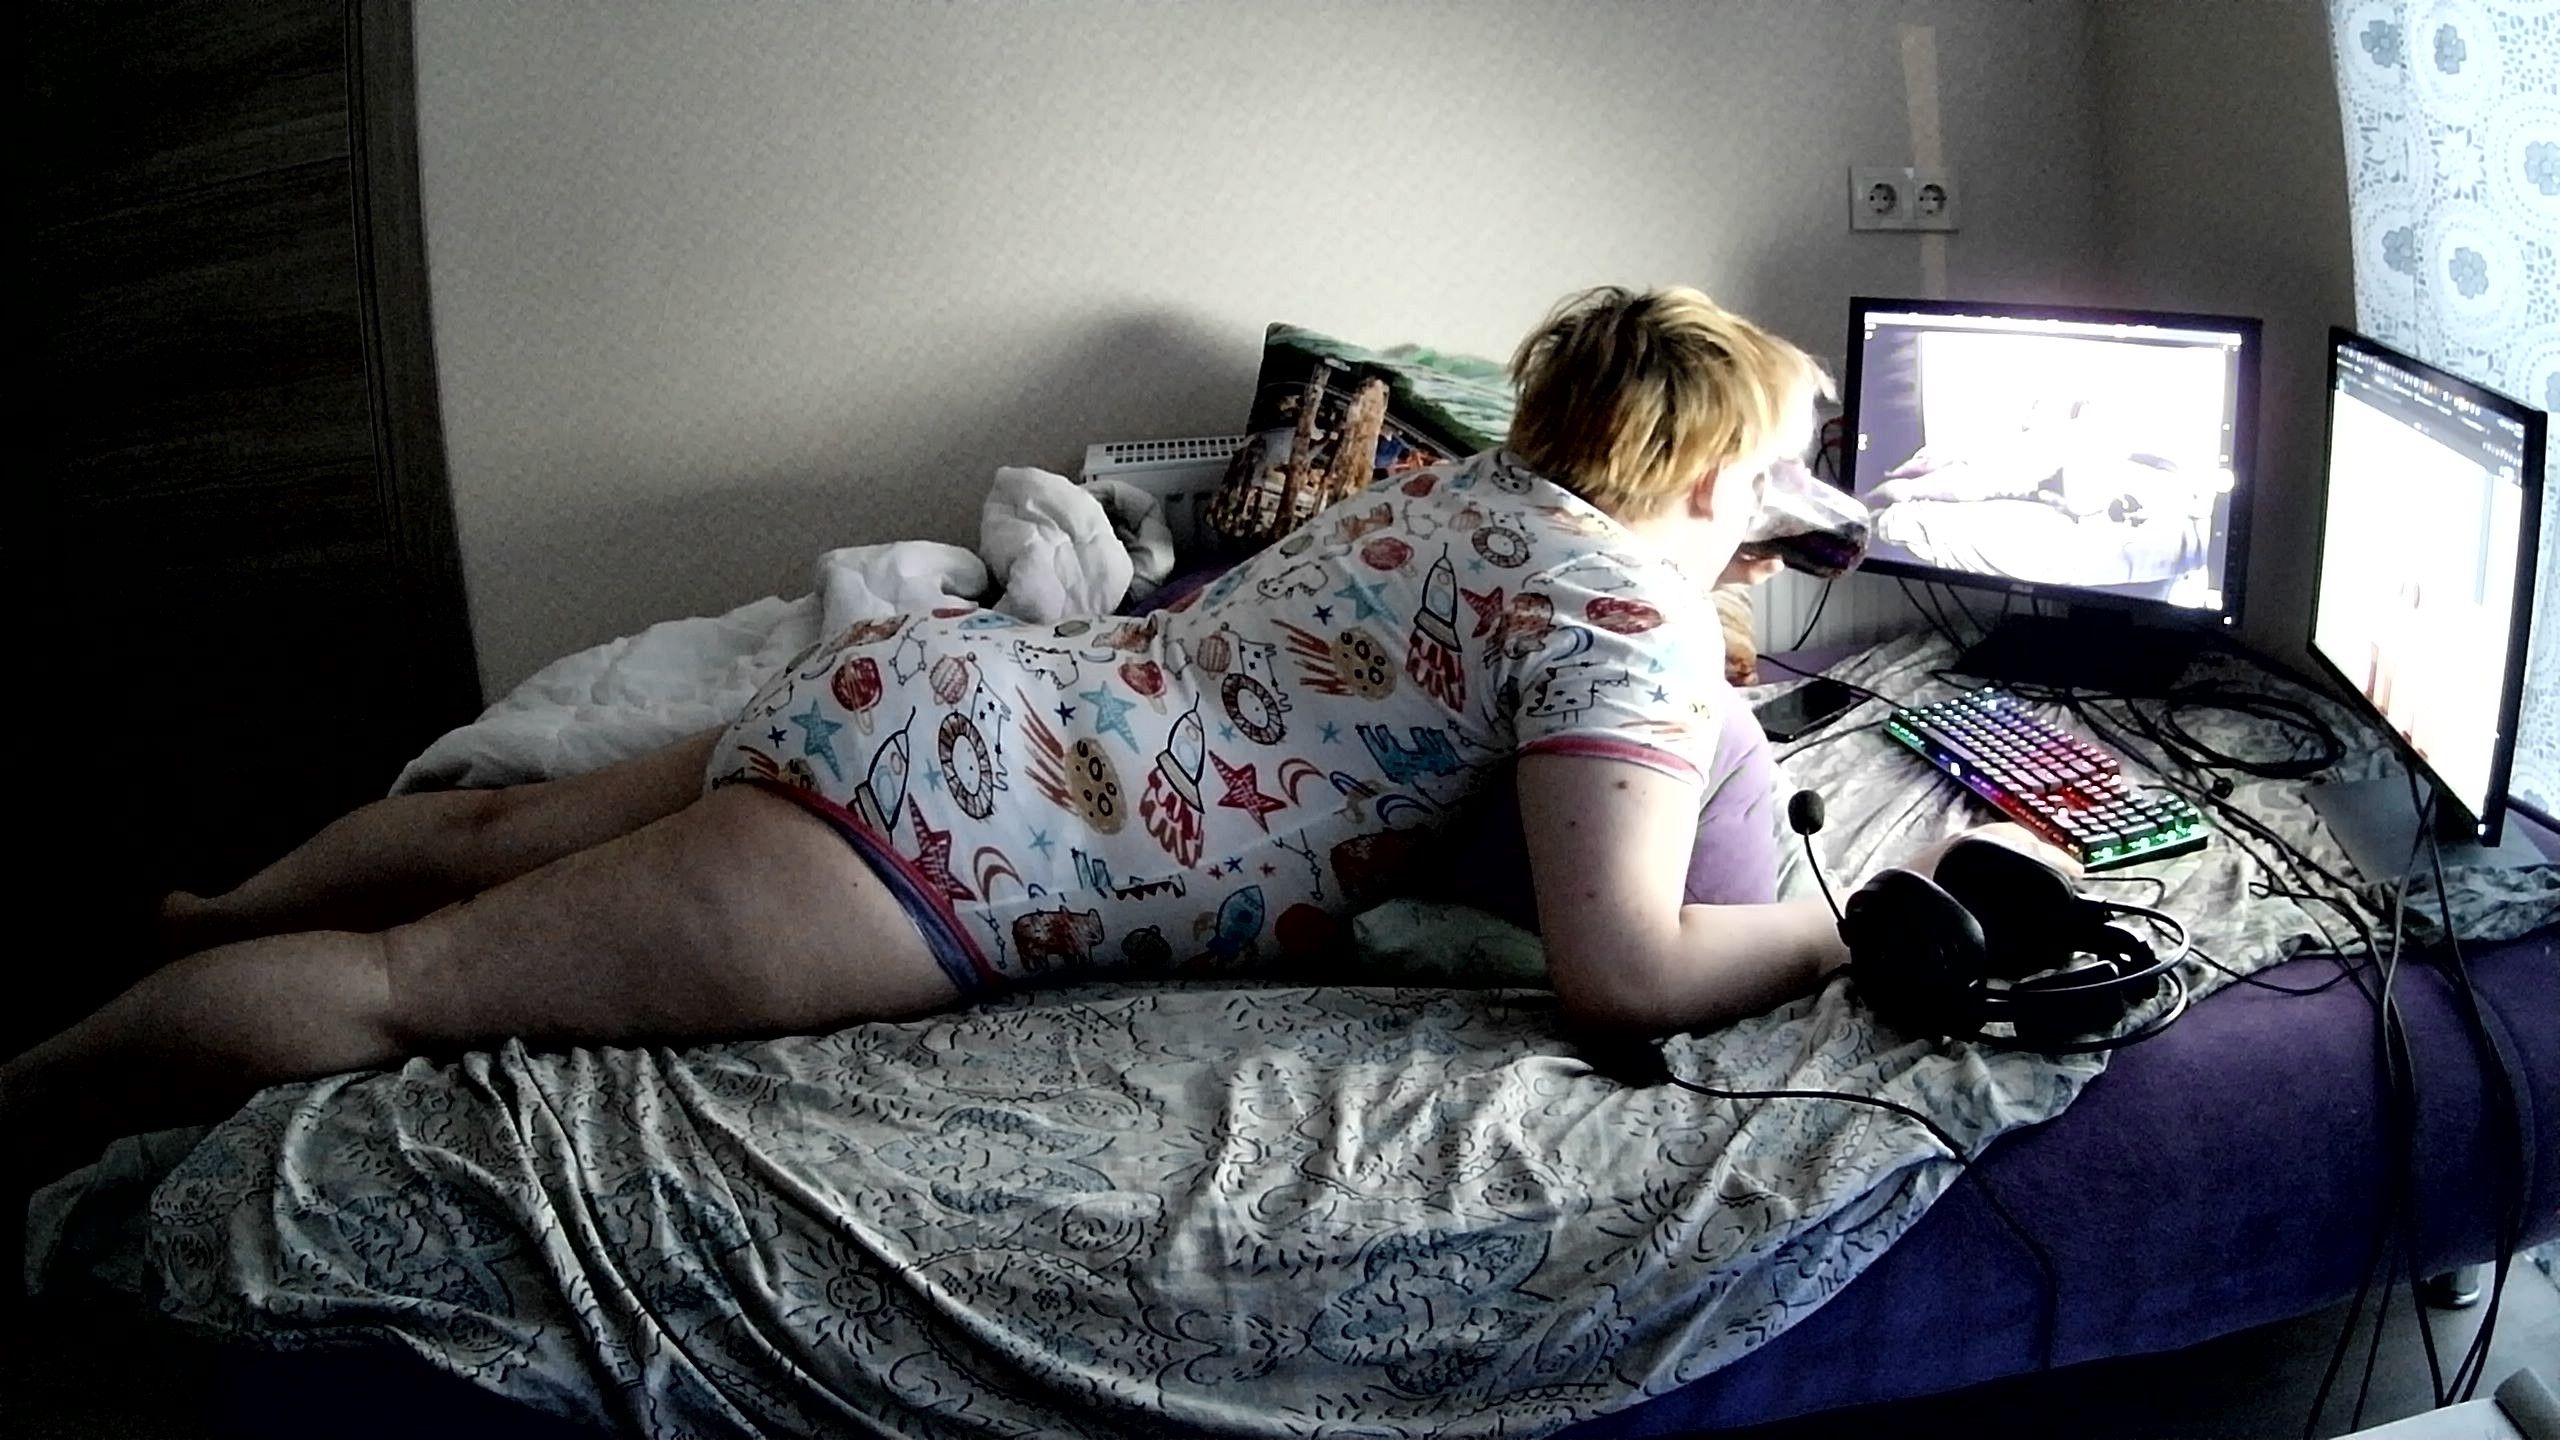 Game streaming while being diapered